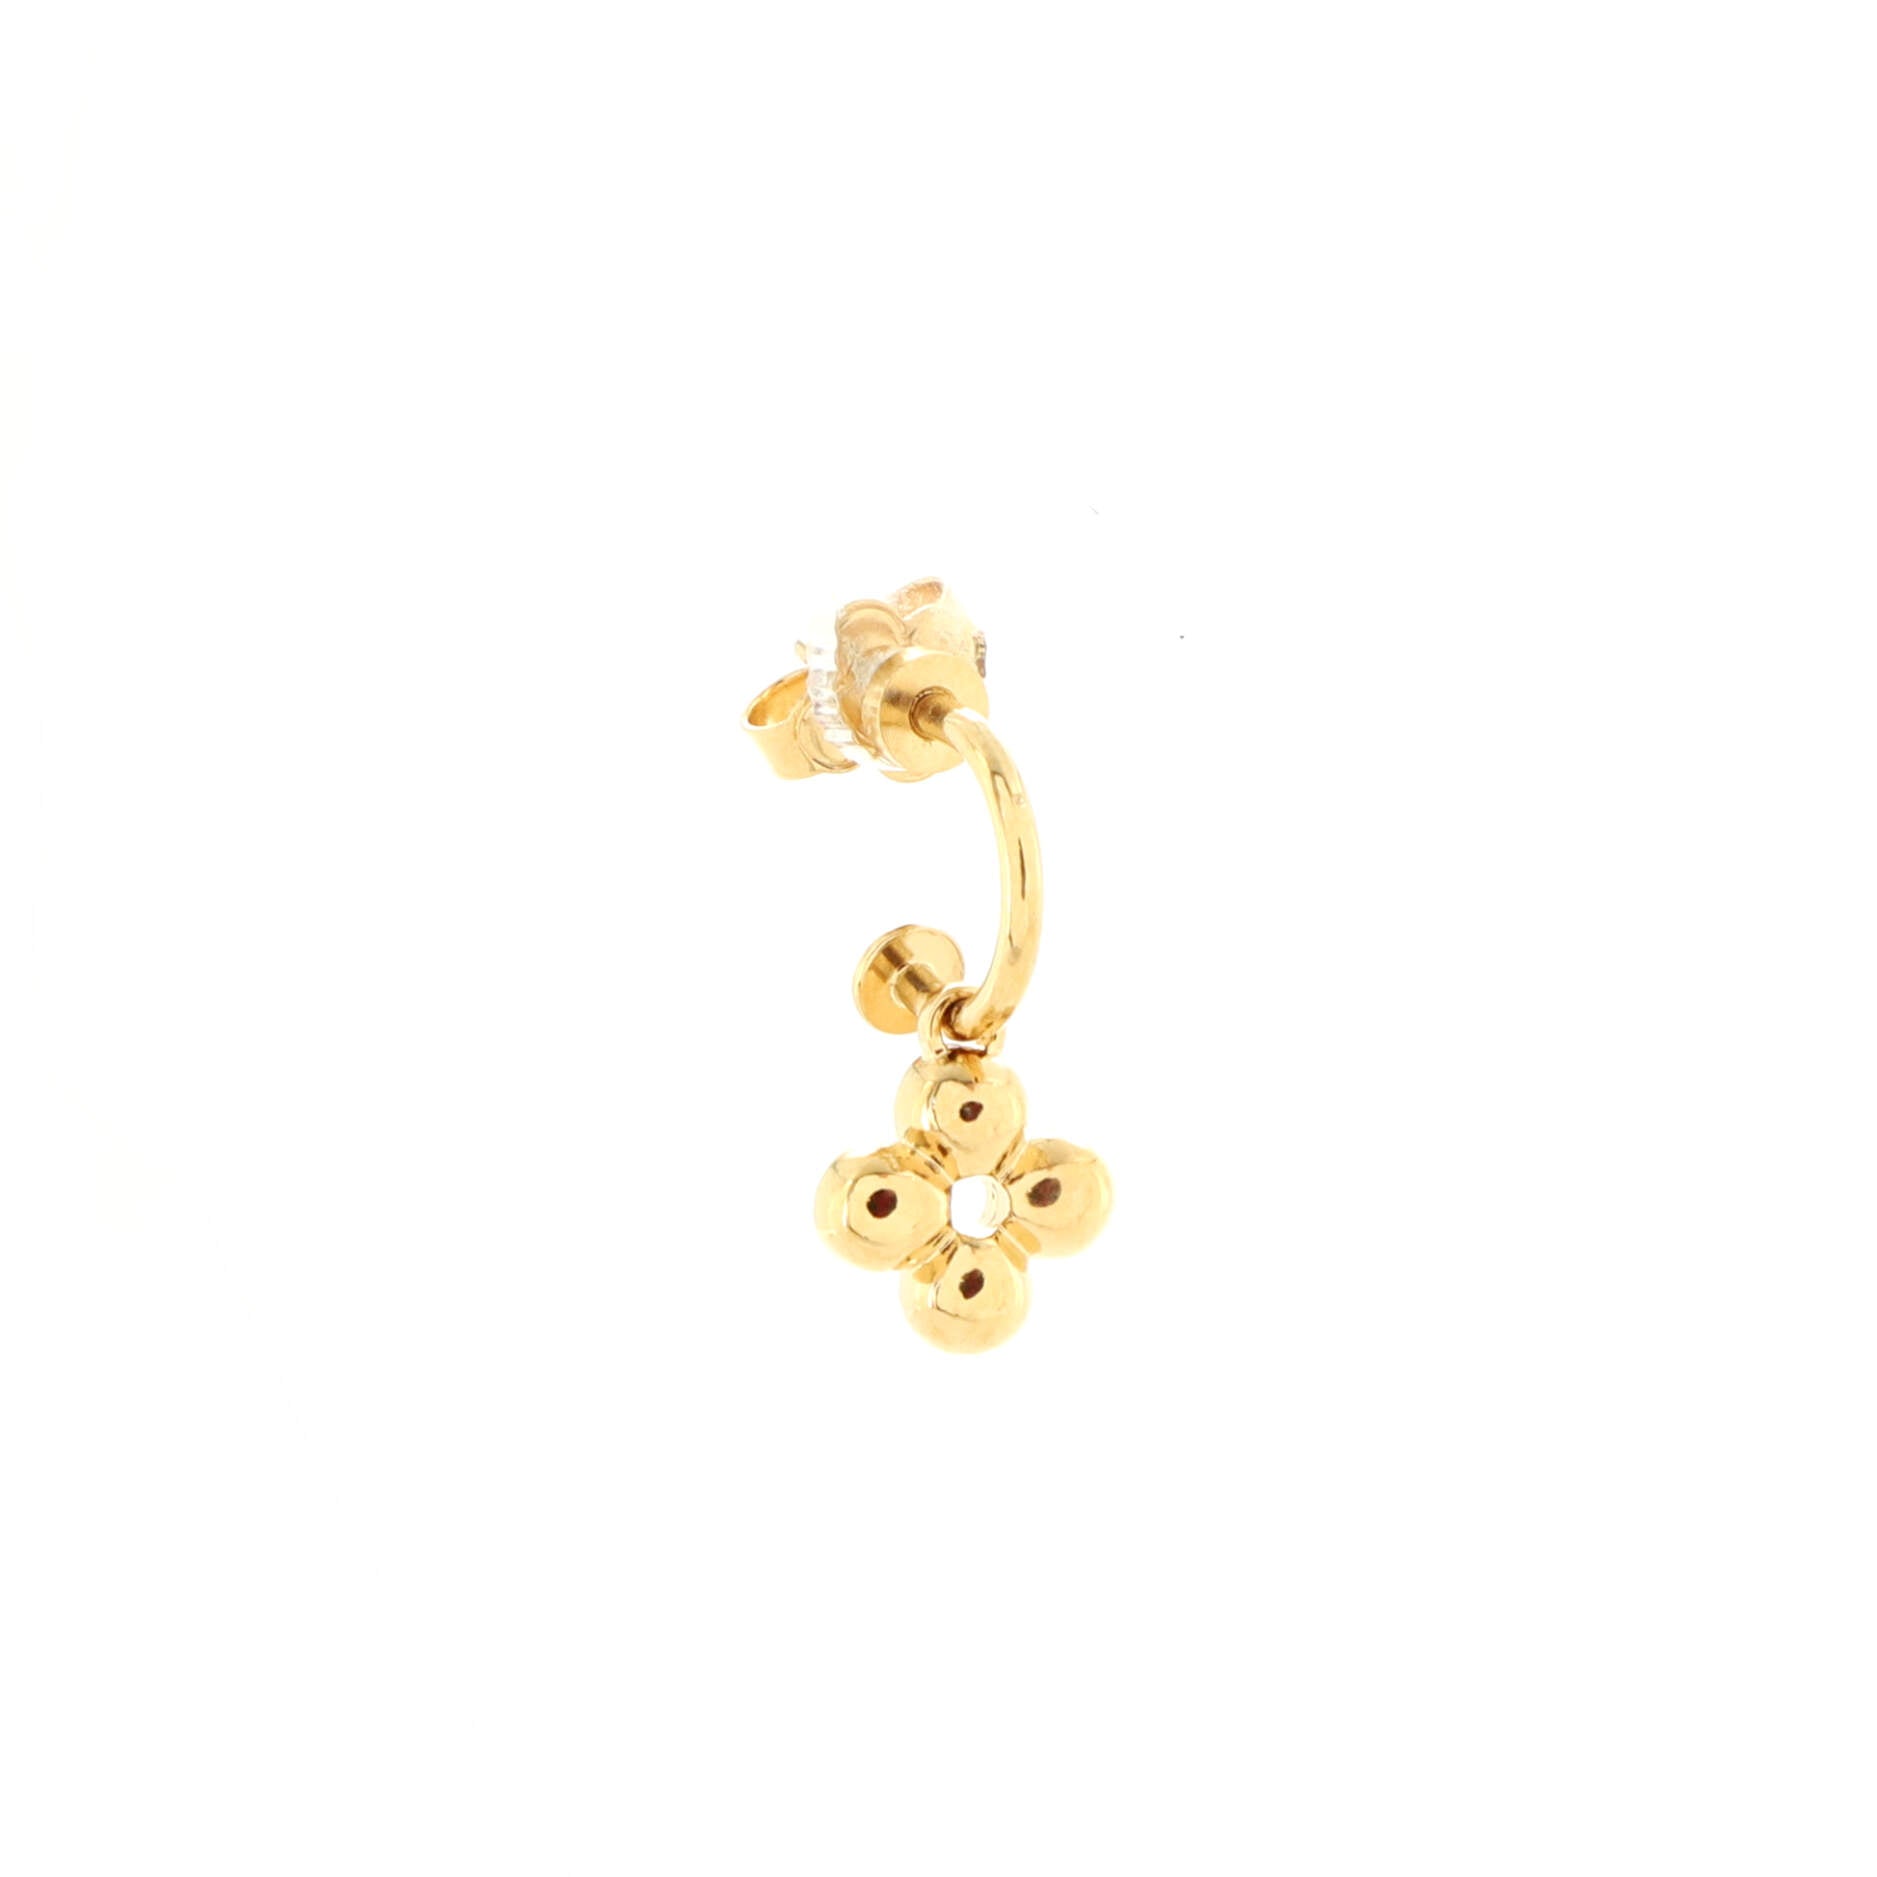 Shop Louis Vuitton Blooming earrings (M64859) by pipi77